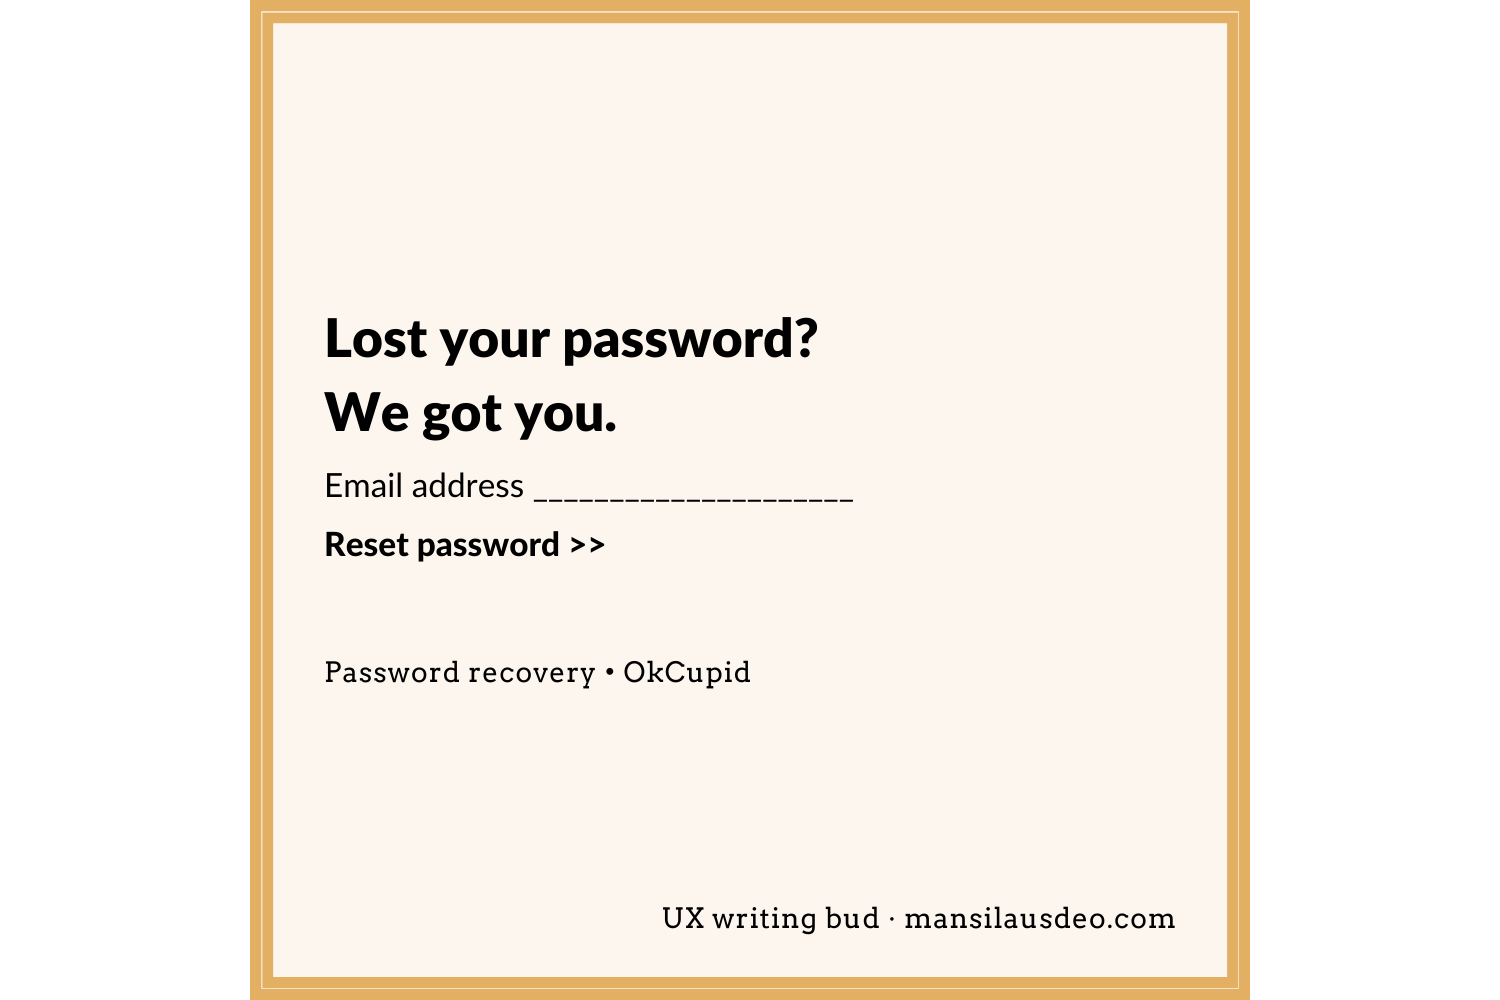 Lost your password? We got you. Email address Reset password >> Password recovery • OkCupid UX writing bud